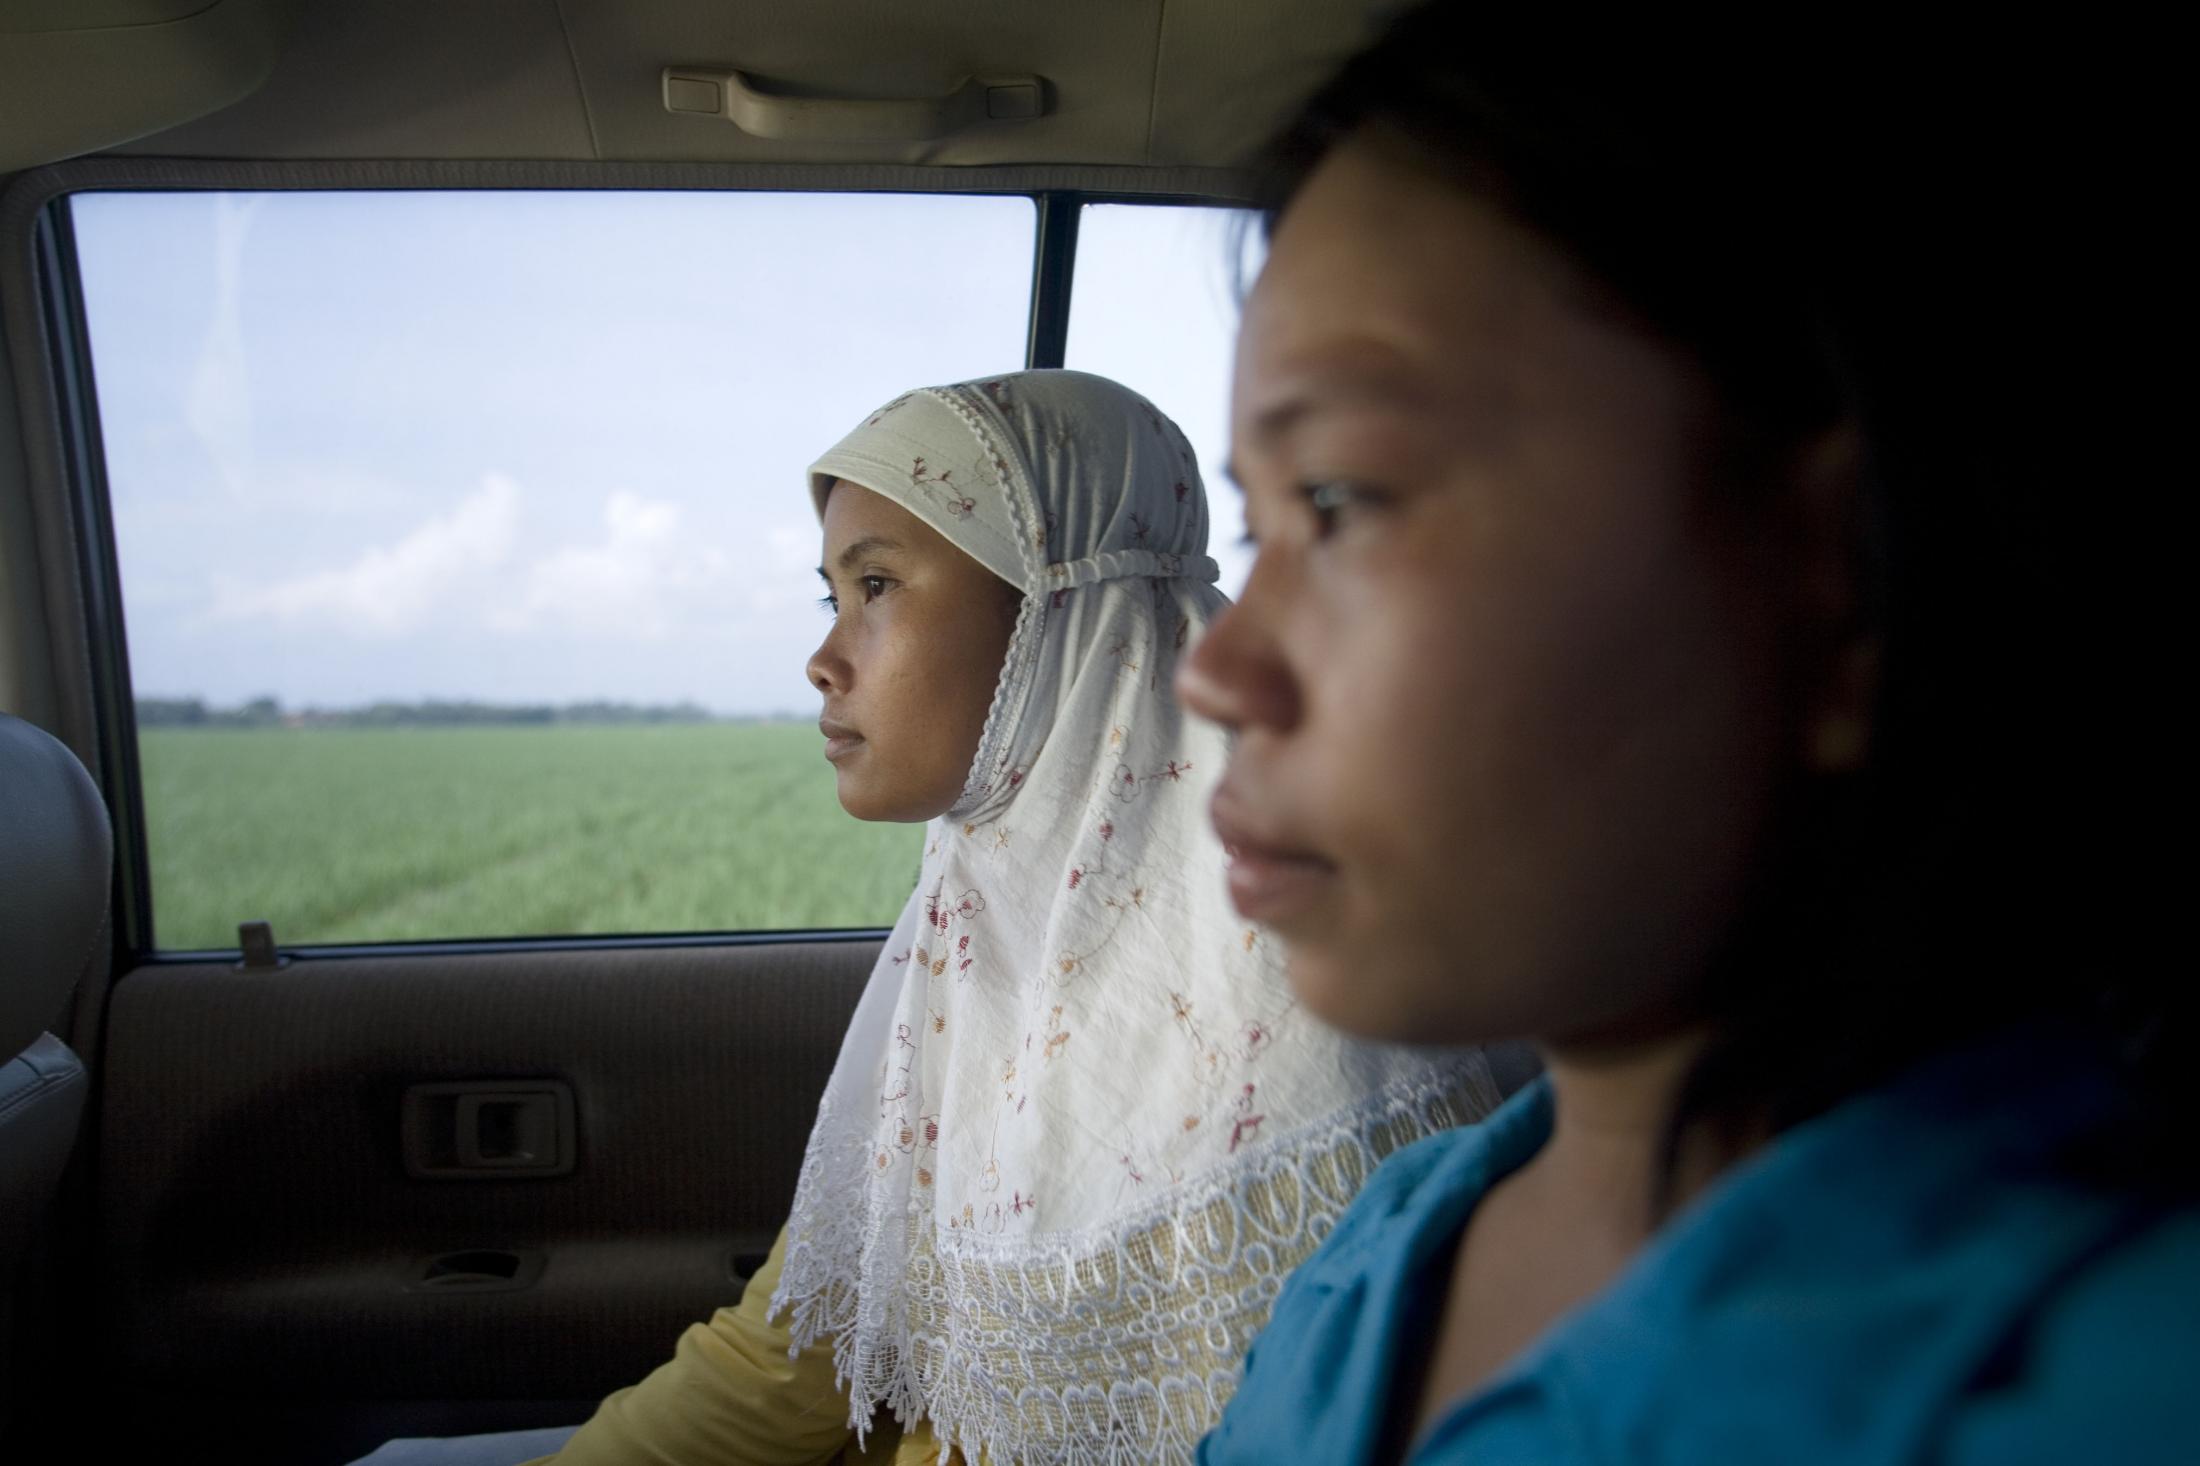 Sari, 28, and Nuryani, 20, begin their journey to a labor recruitment agency in Jakarta to be...